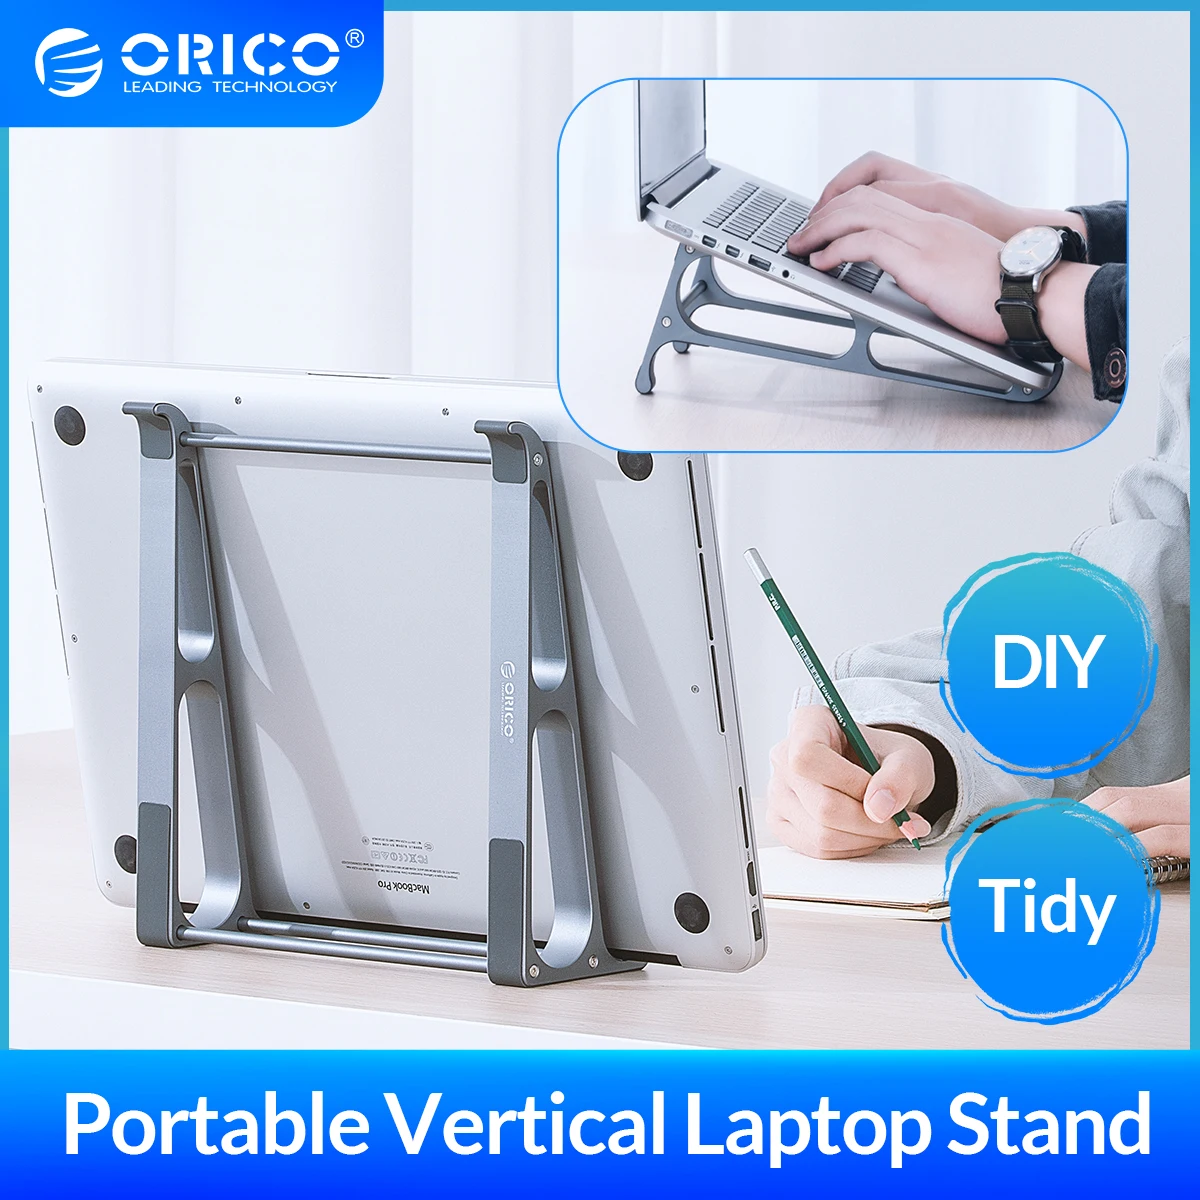 

ORICO Portable Vertical Laptop Stand Riser Aluminium Detachable Computer Stand Tablet Holder for 13-17 inch MacBook Notebook